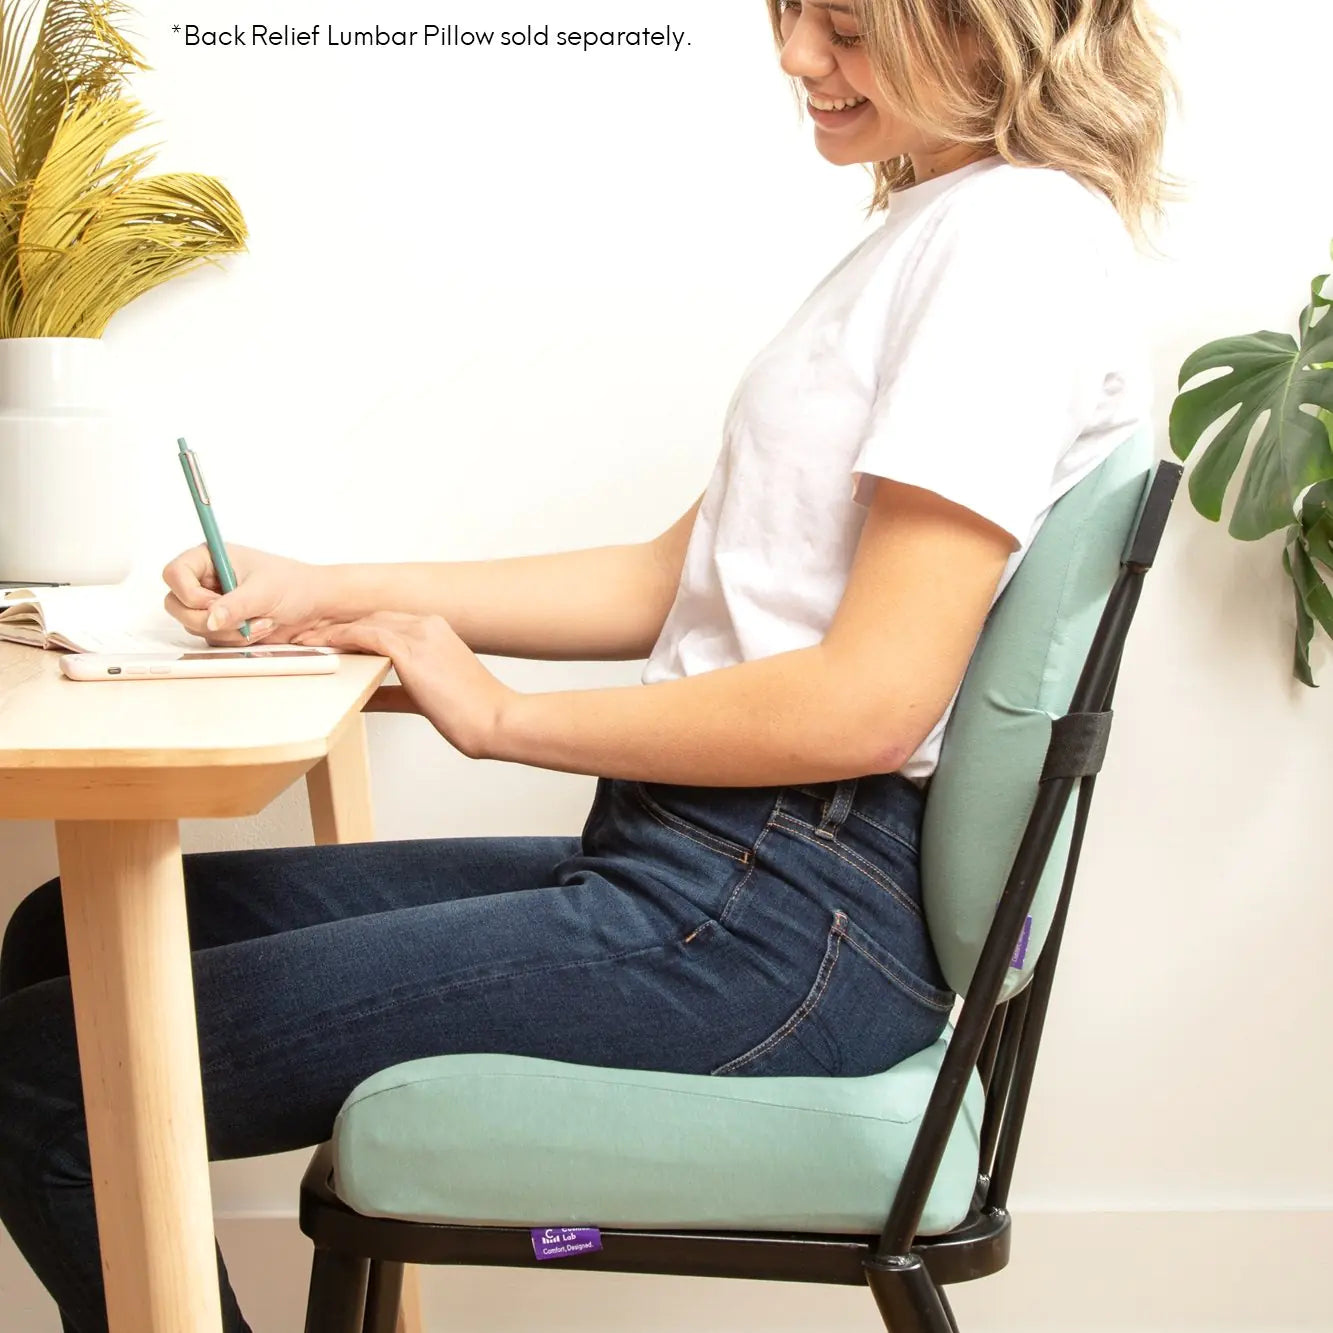 Ergonomic Pressure Relief Seat Cushion - Enhance Your Sitting Experience Anywhere